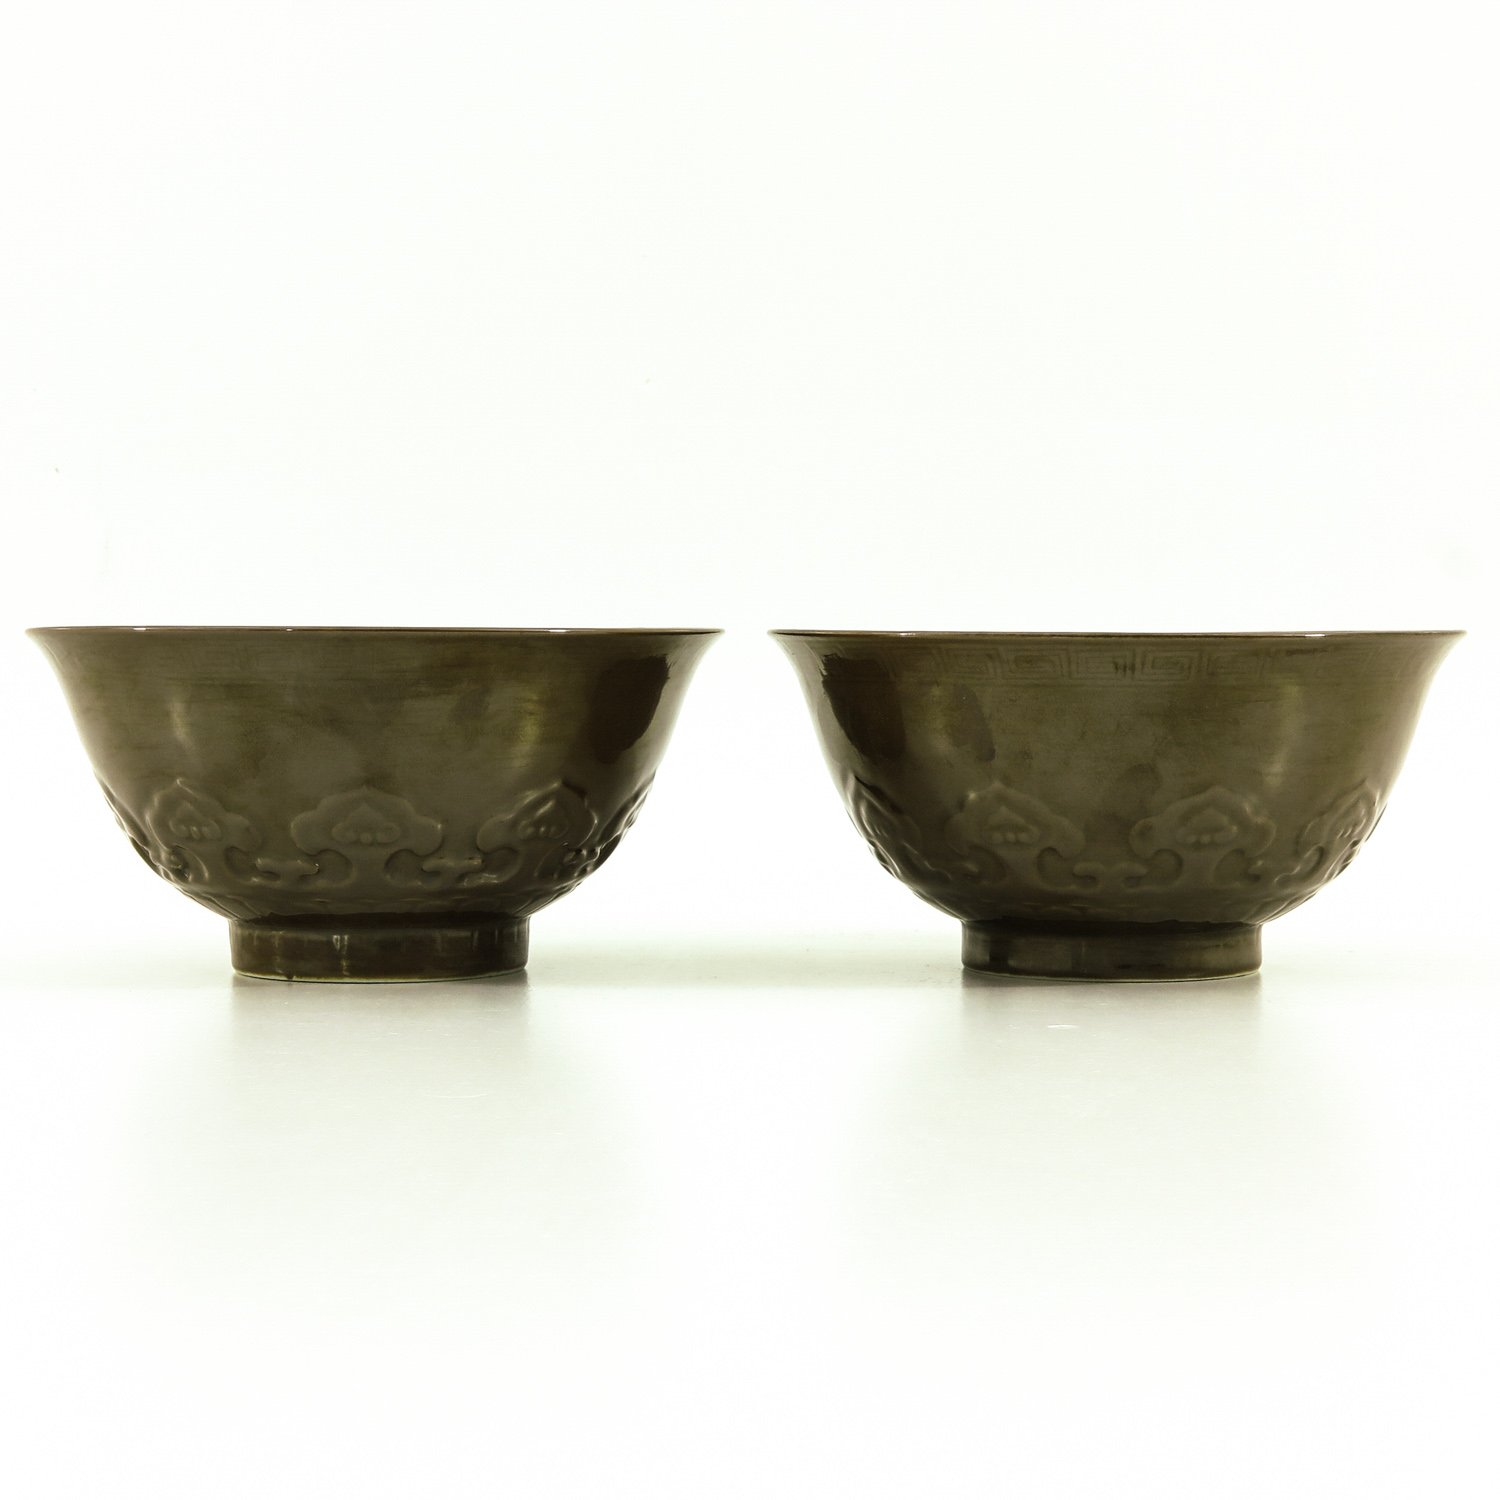 A Pair of Monochrome Brown Glaze Bowls - Image 3 of 10